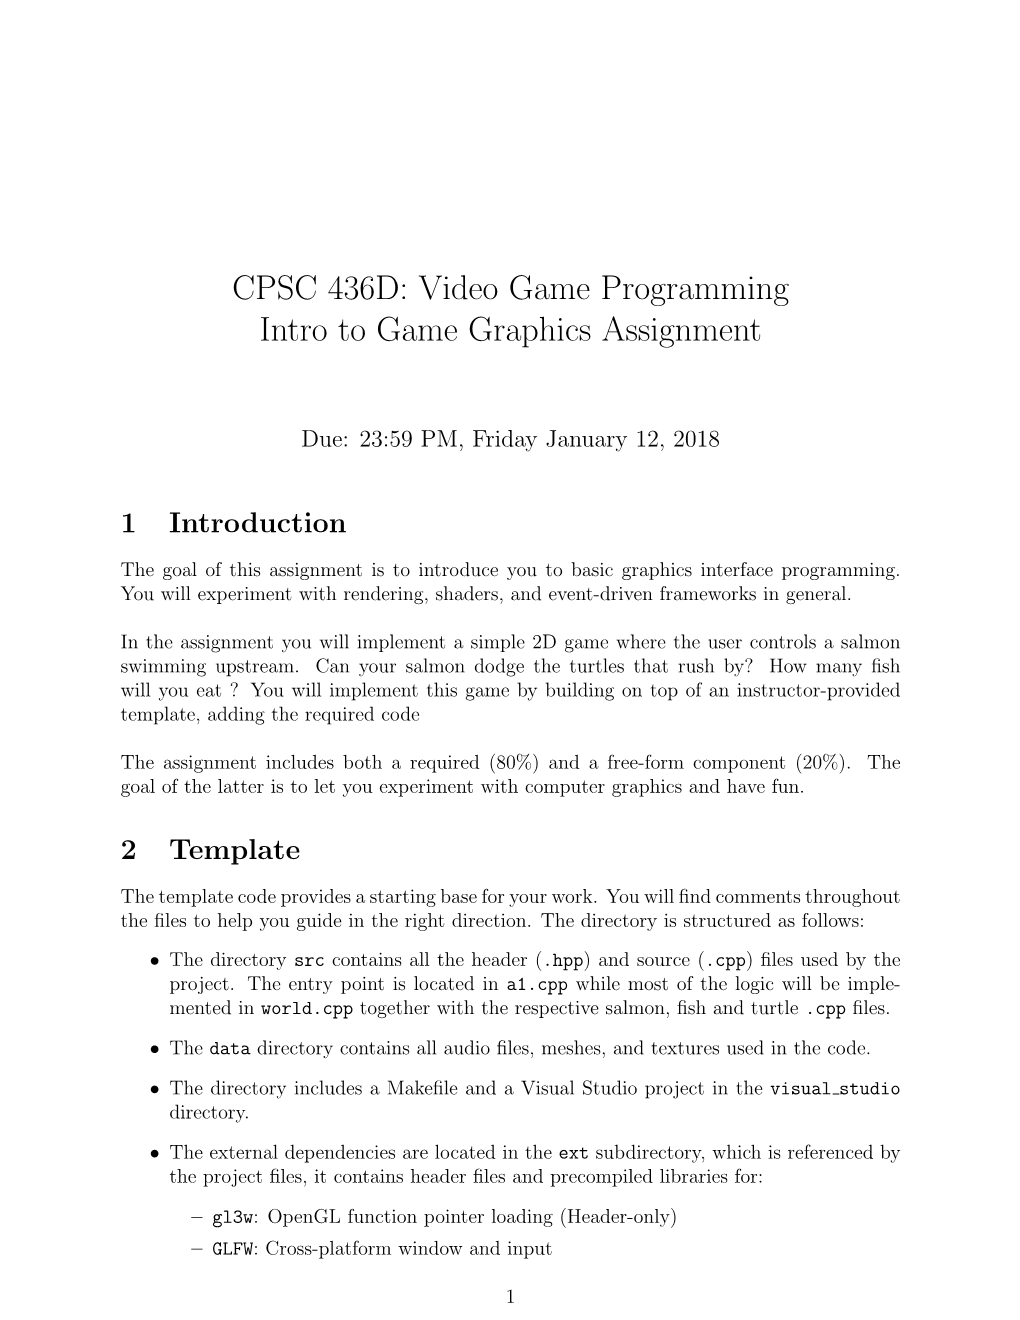 Video Game Programming Intro to Game Graphics Assignment